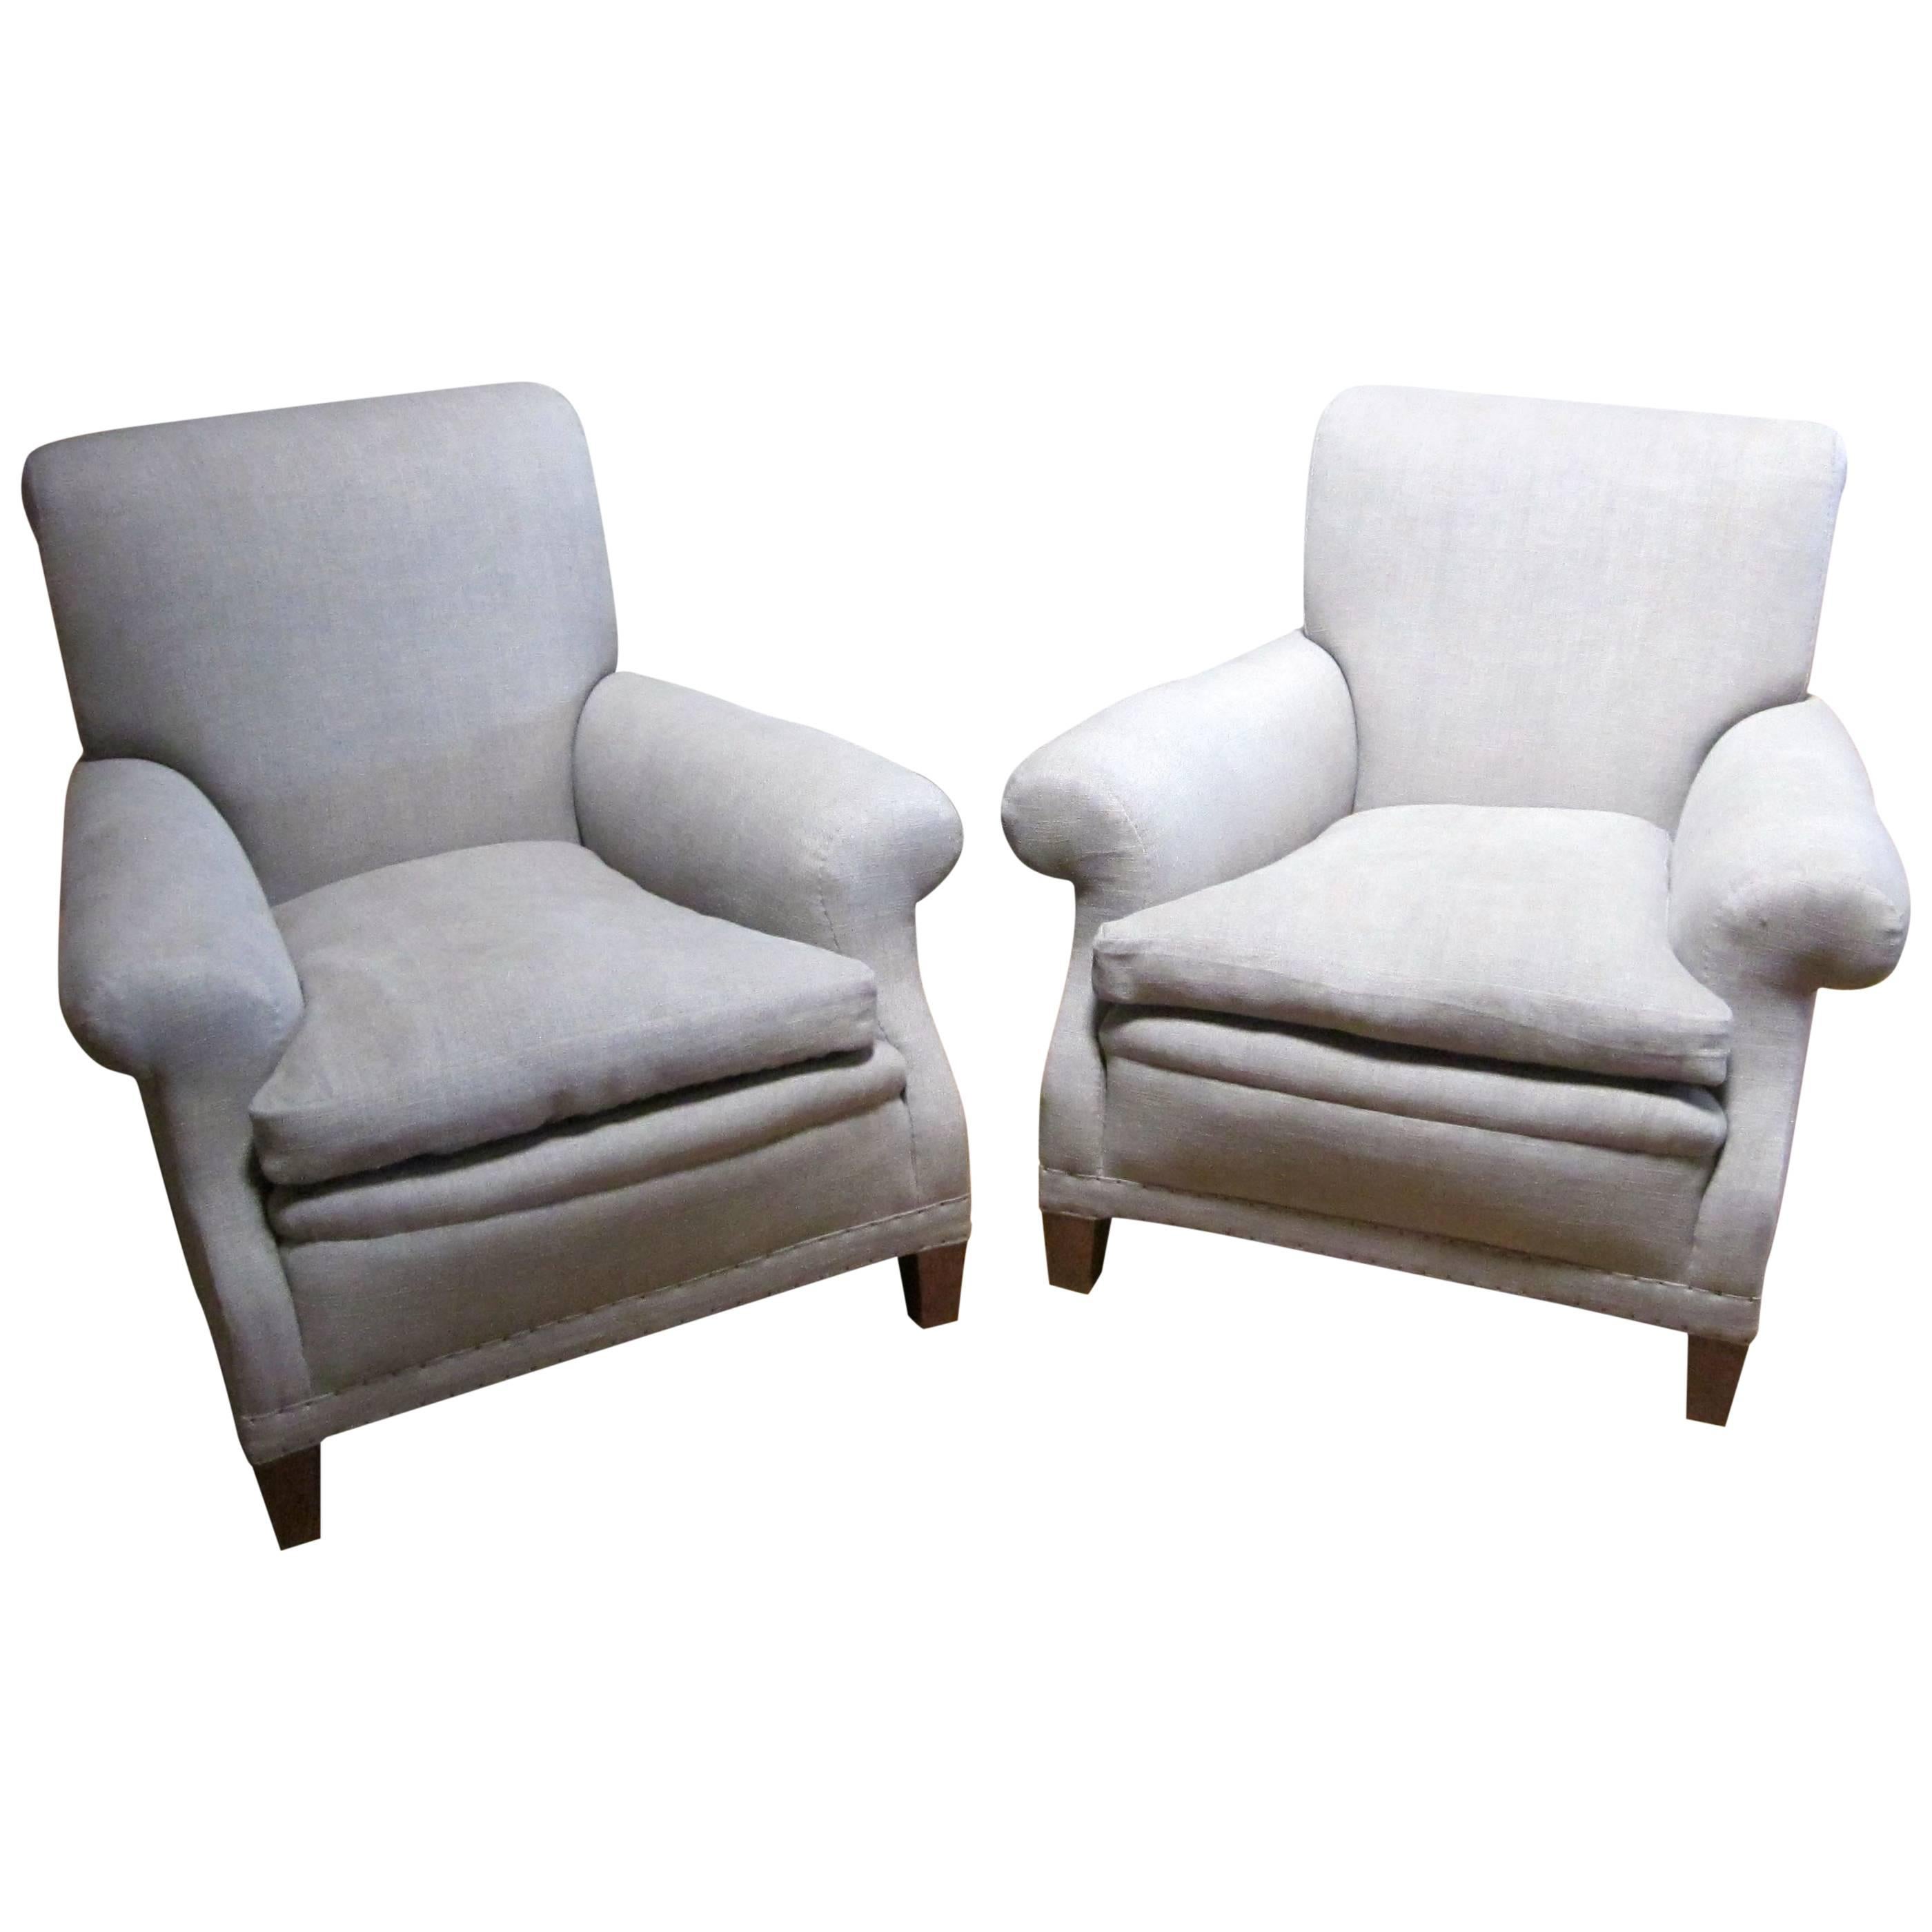 1920s Pair of Upholstered Club Chairs, England